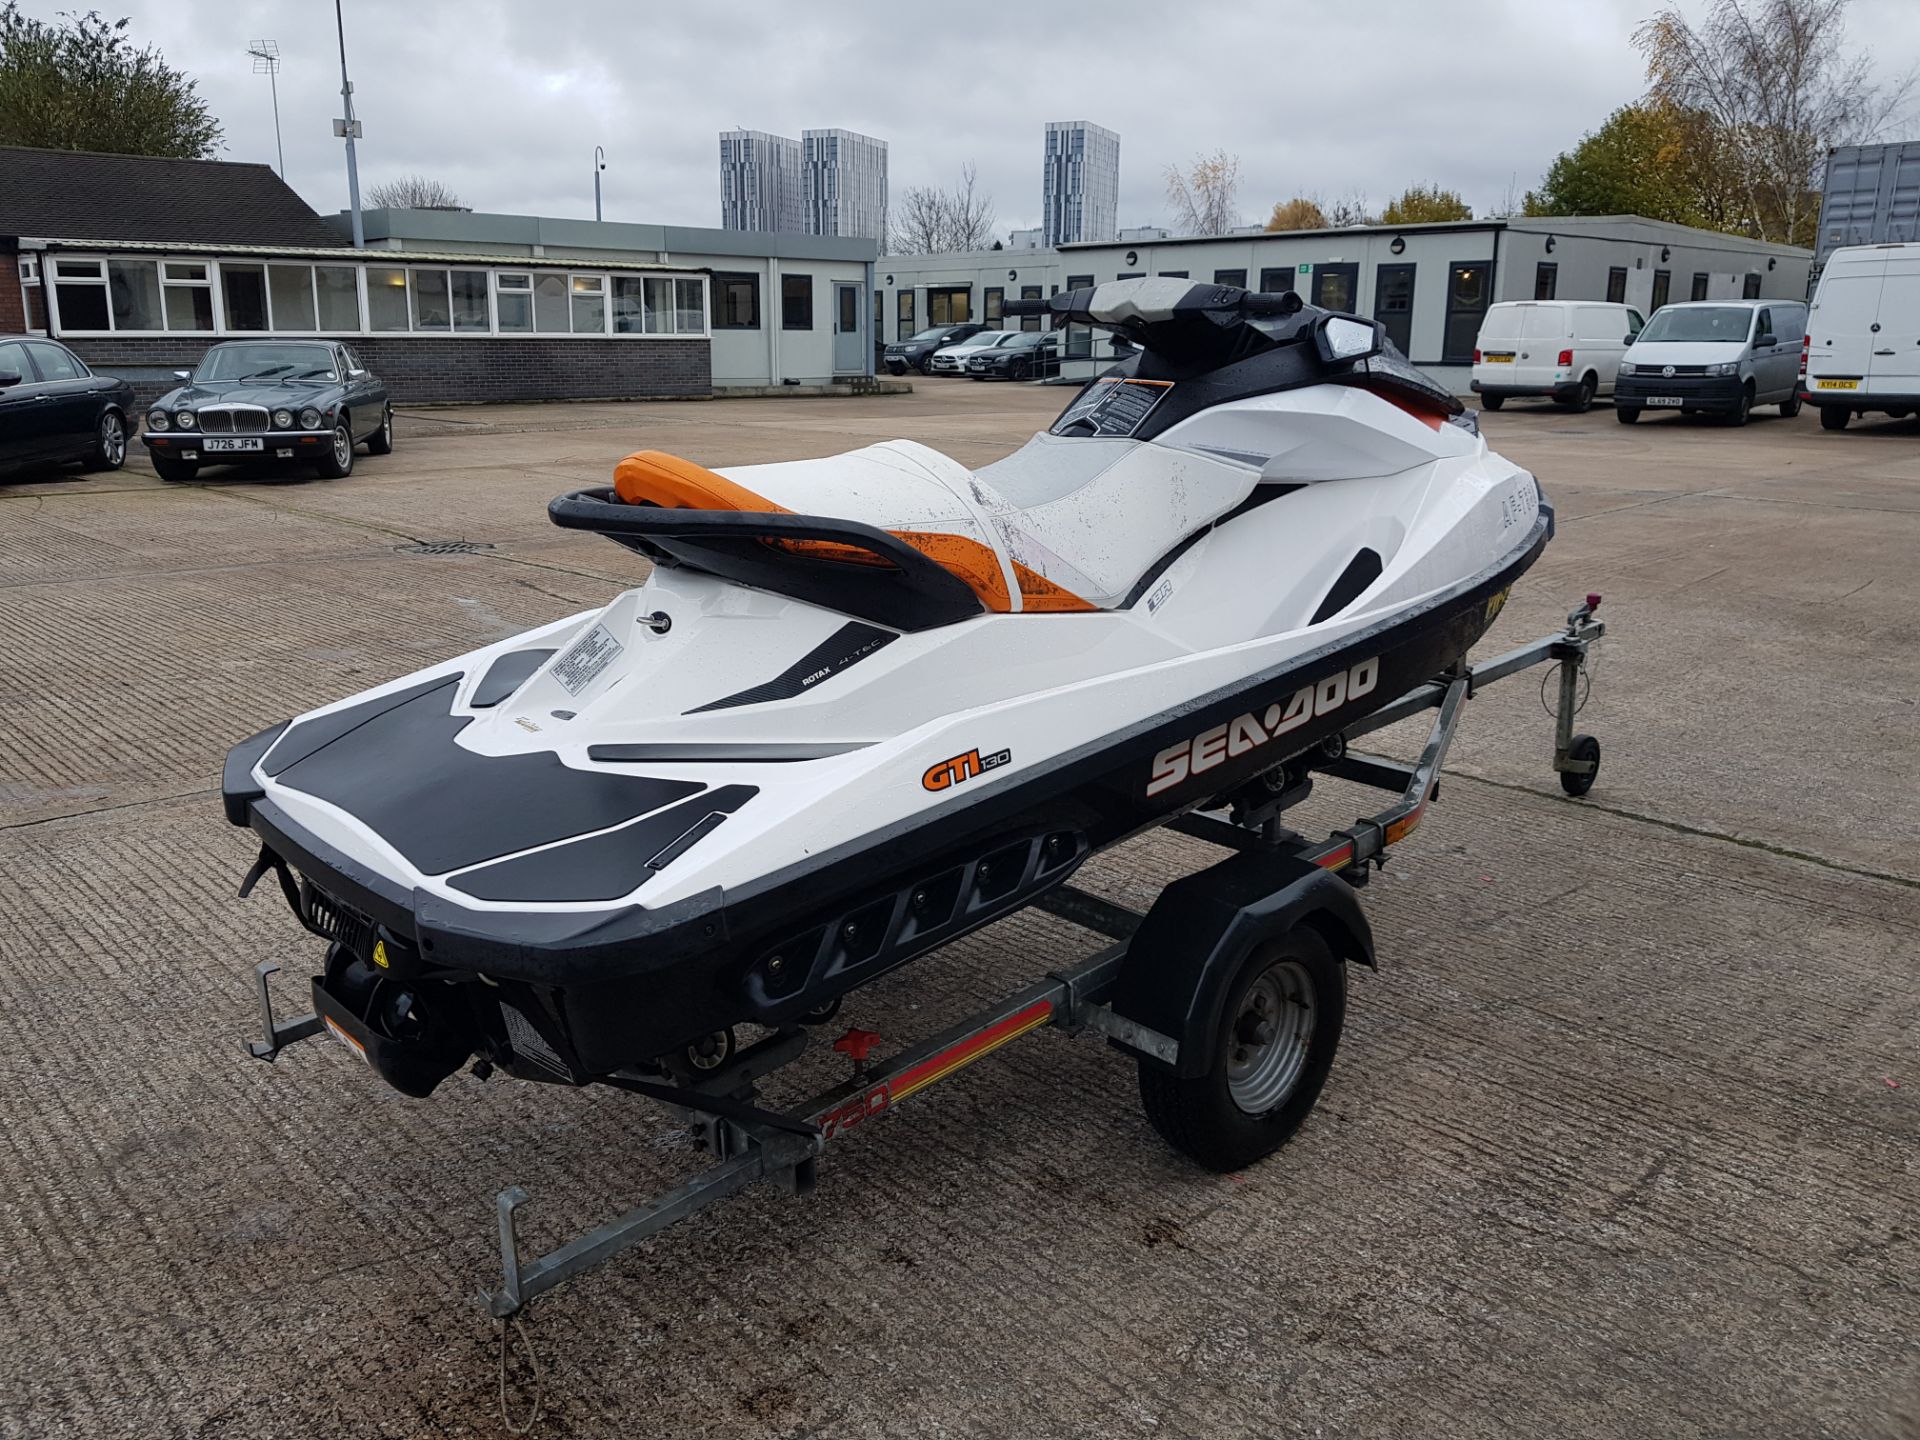 SEA DOO GTI-130 IBR - INTELLIGENT BRAKE & REVERSE ROTAX 4-TEC 2 PERSONS JET SKI WITH AN SBS TOWING - Image 3 of 6